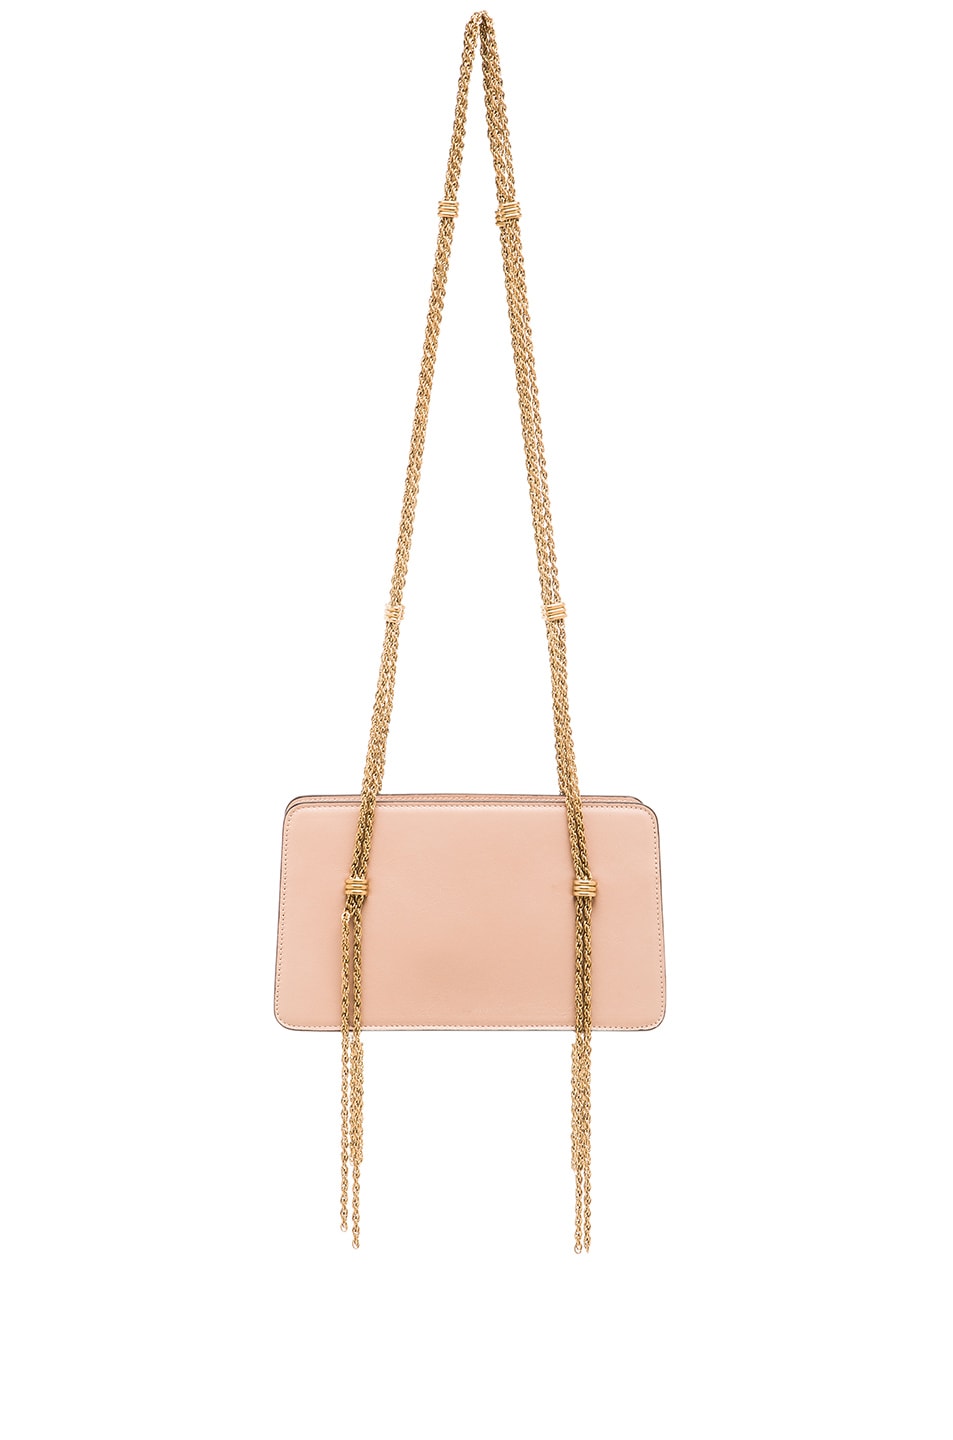 Image 1 of Lanvin Chain Strap Calfskin Bag in Nude